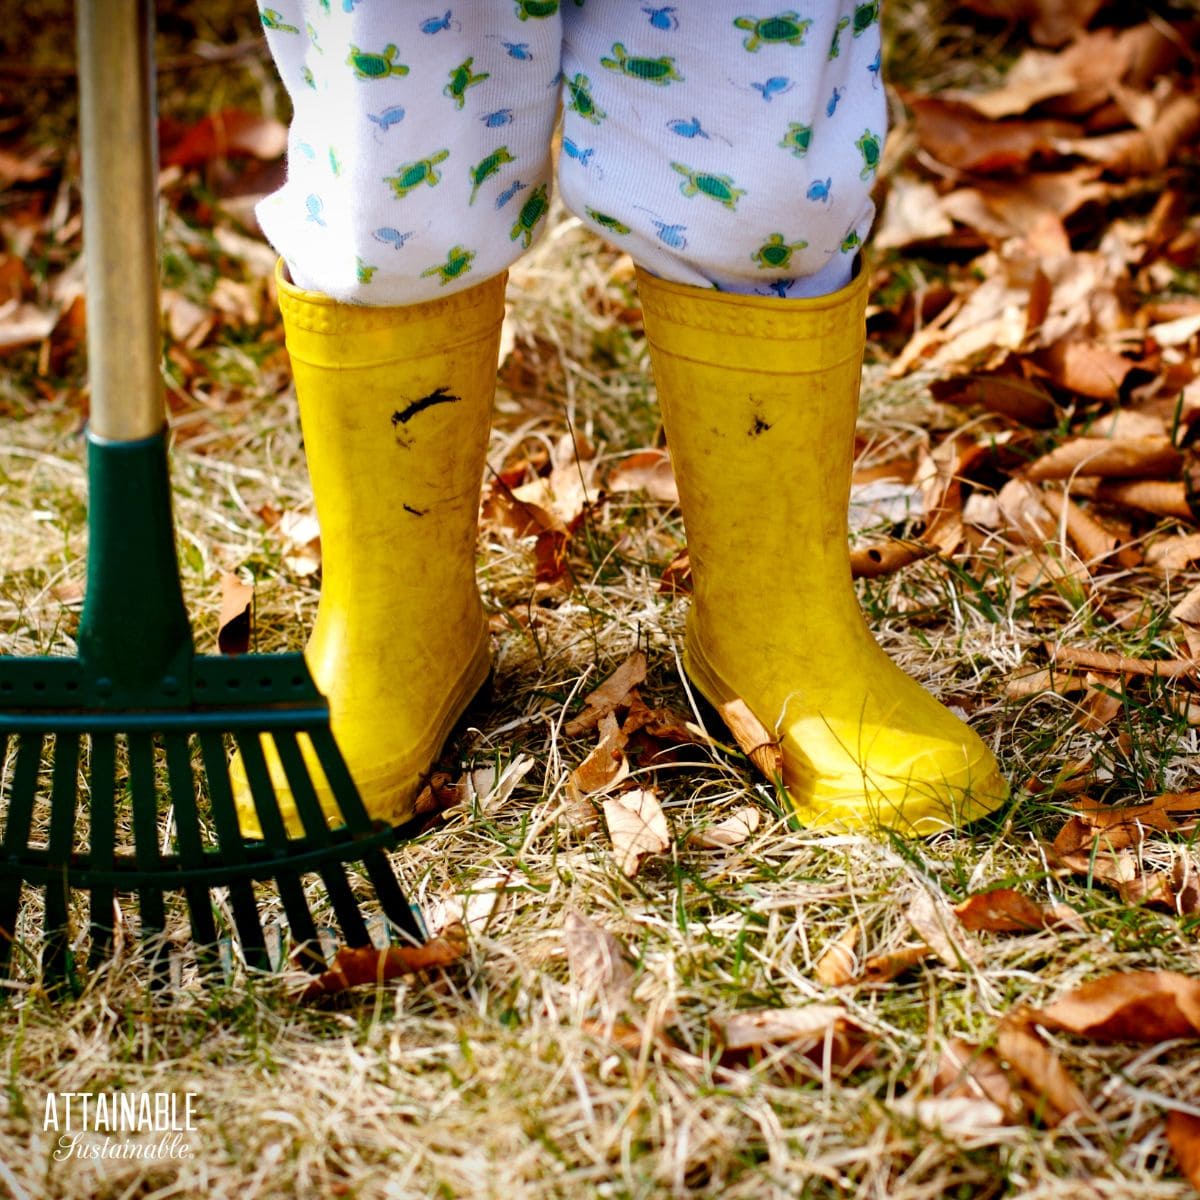 child from the thighs down, in yellow boot, holding a leaf rake.